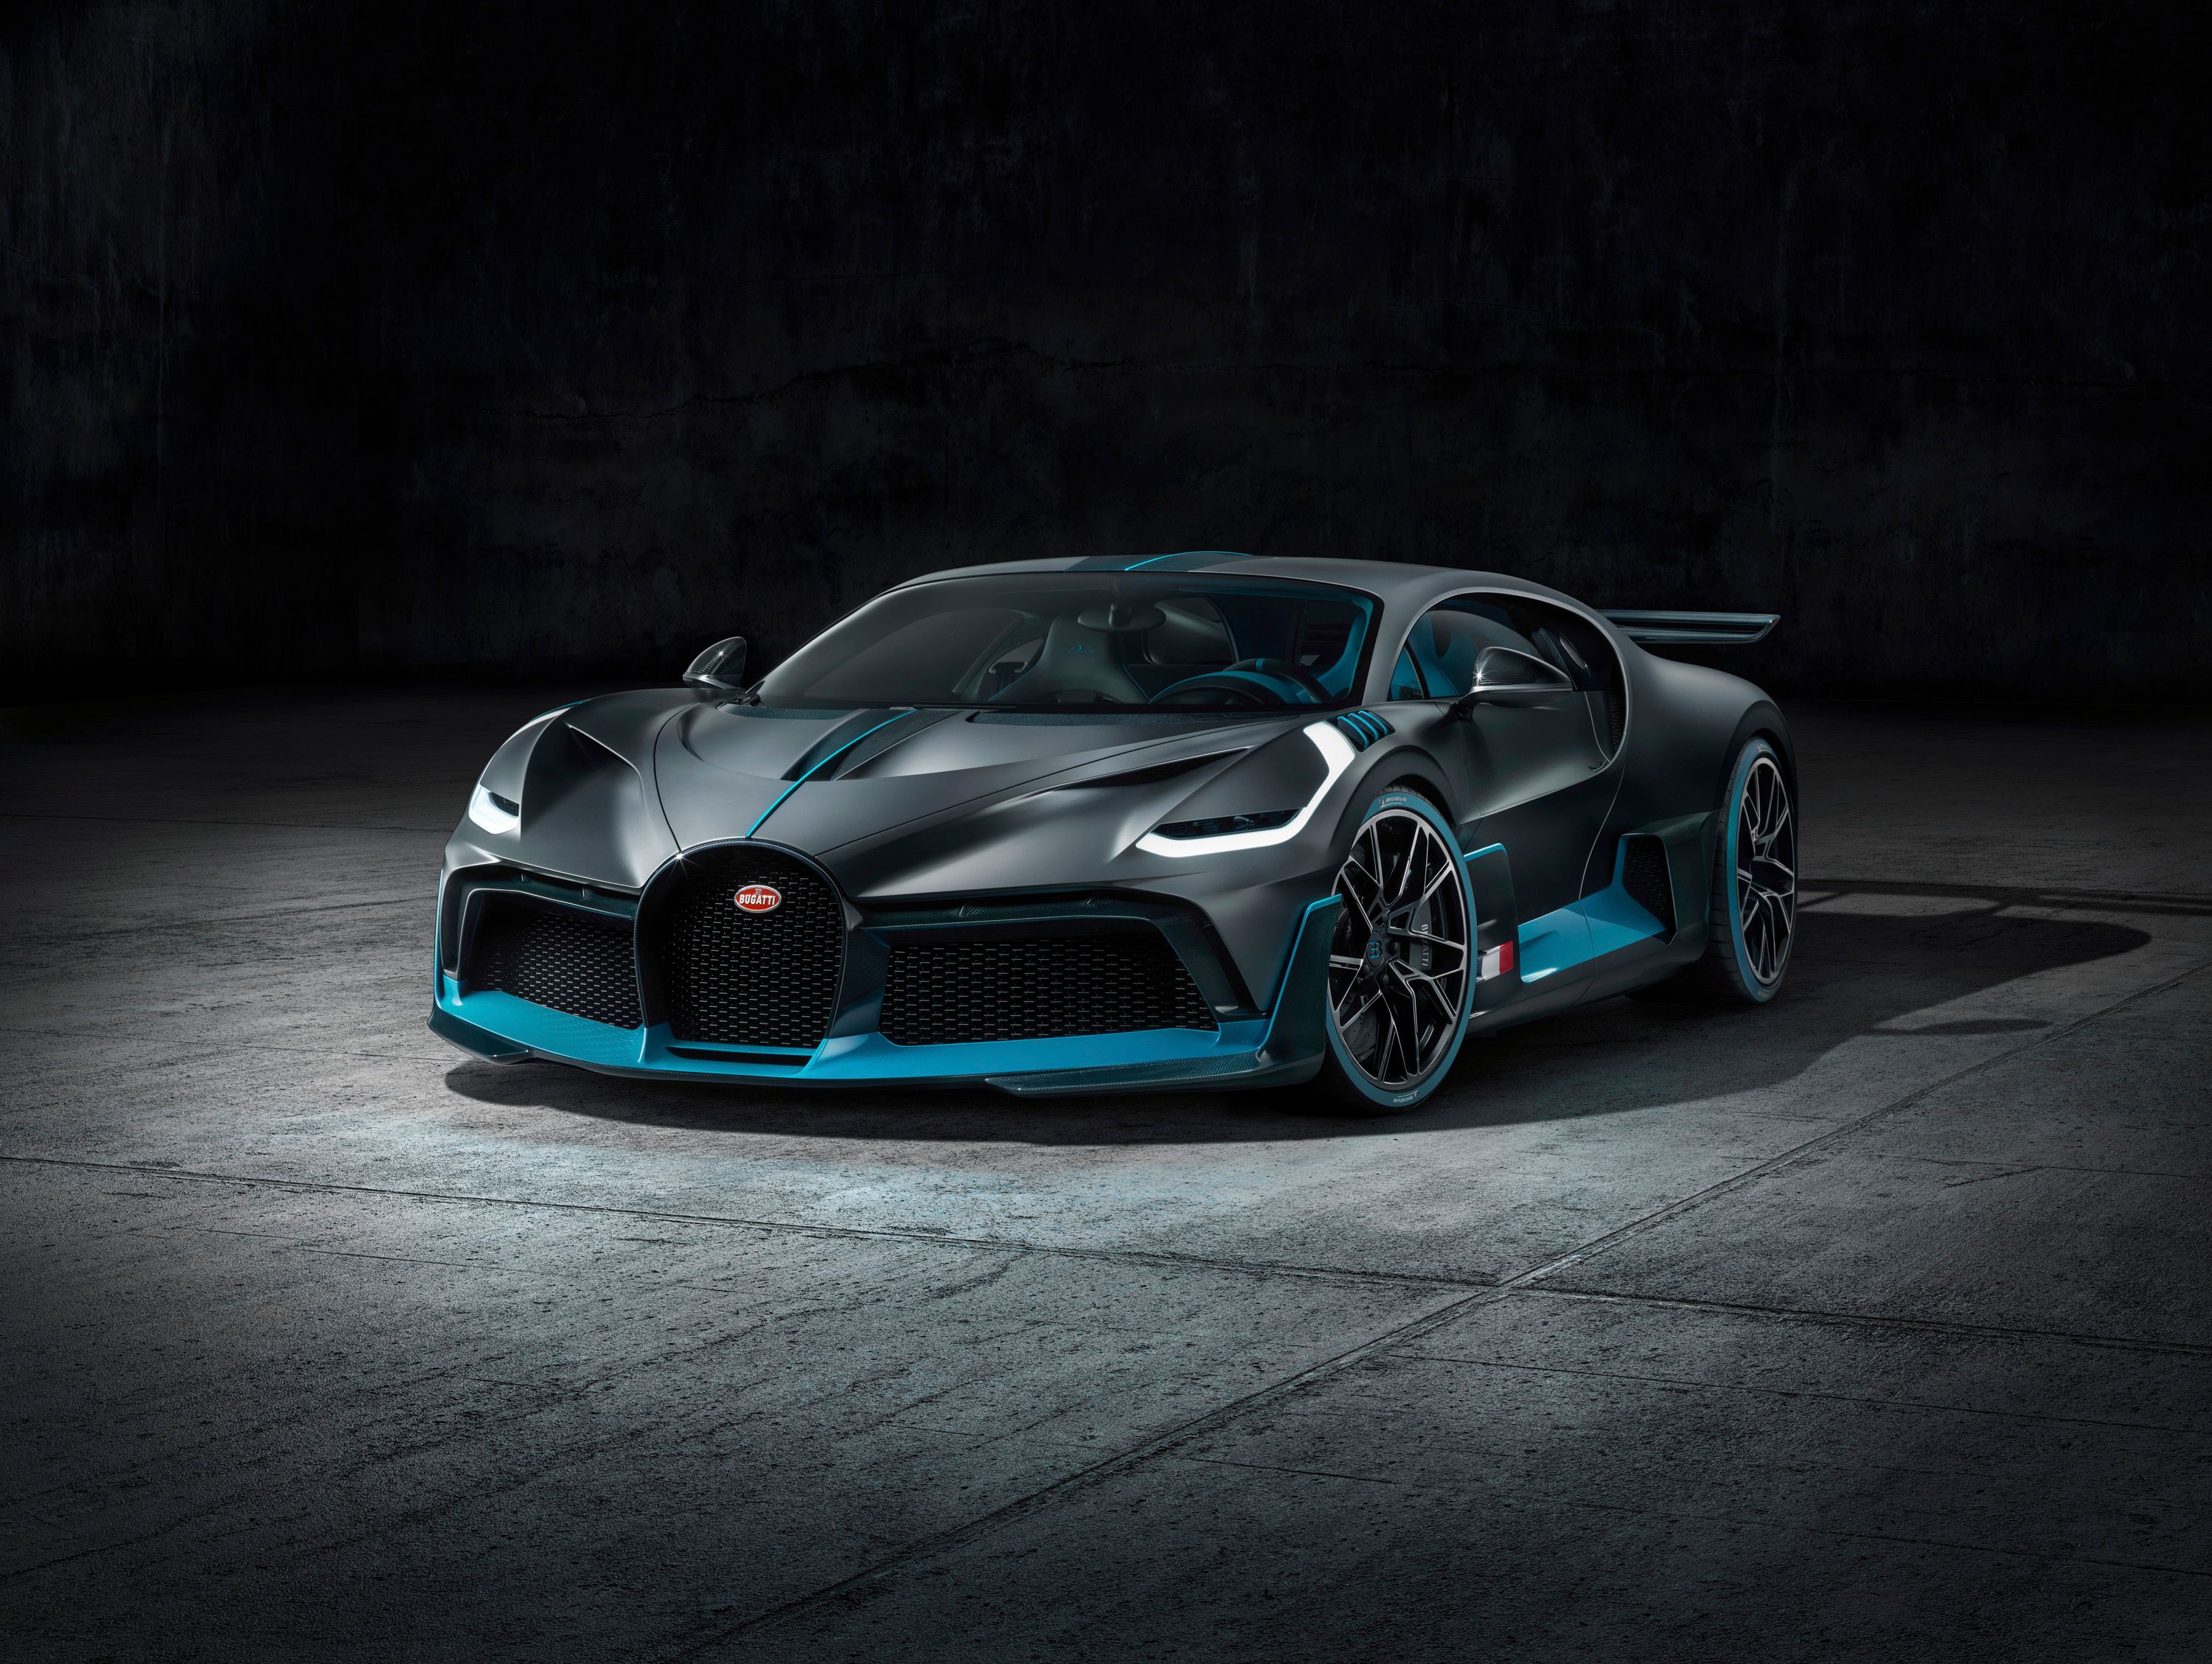 2019 Meet the Bugatti Divo – The Chiron’s Angry Cousin